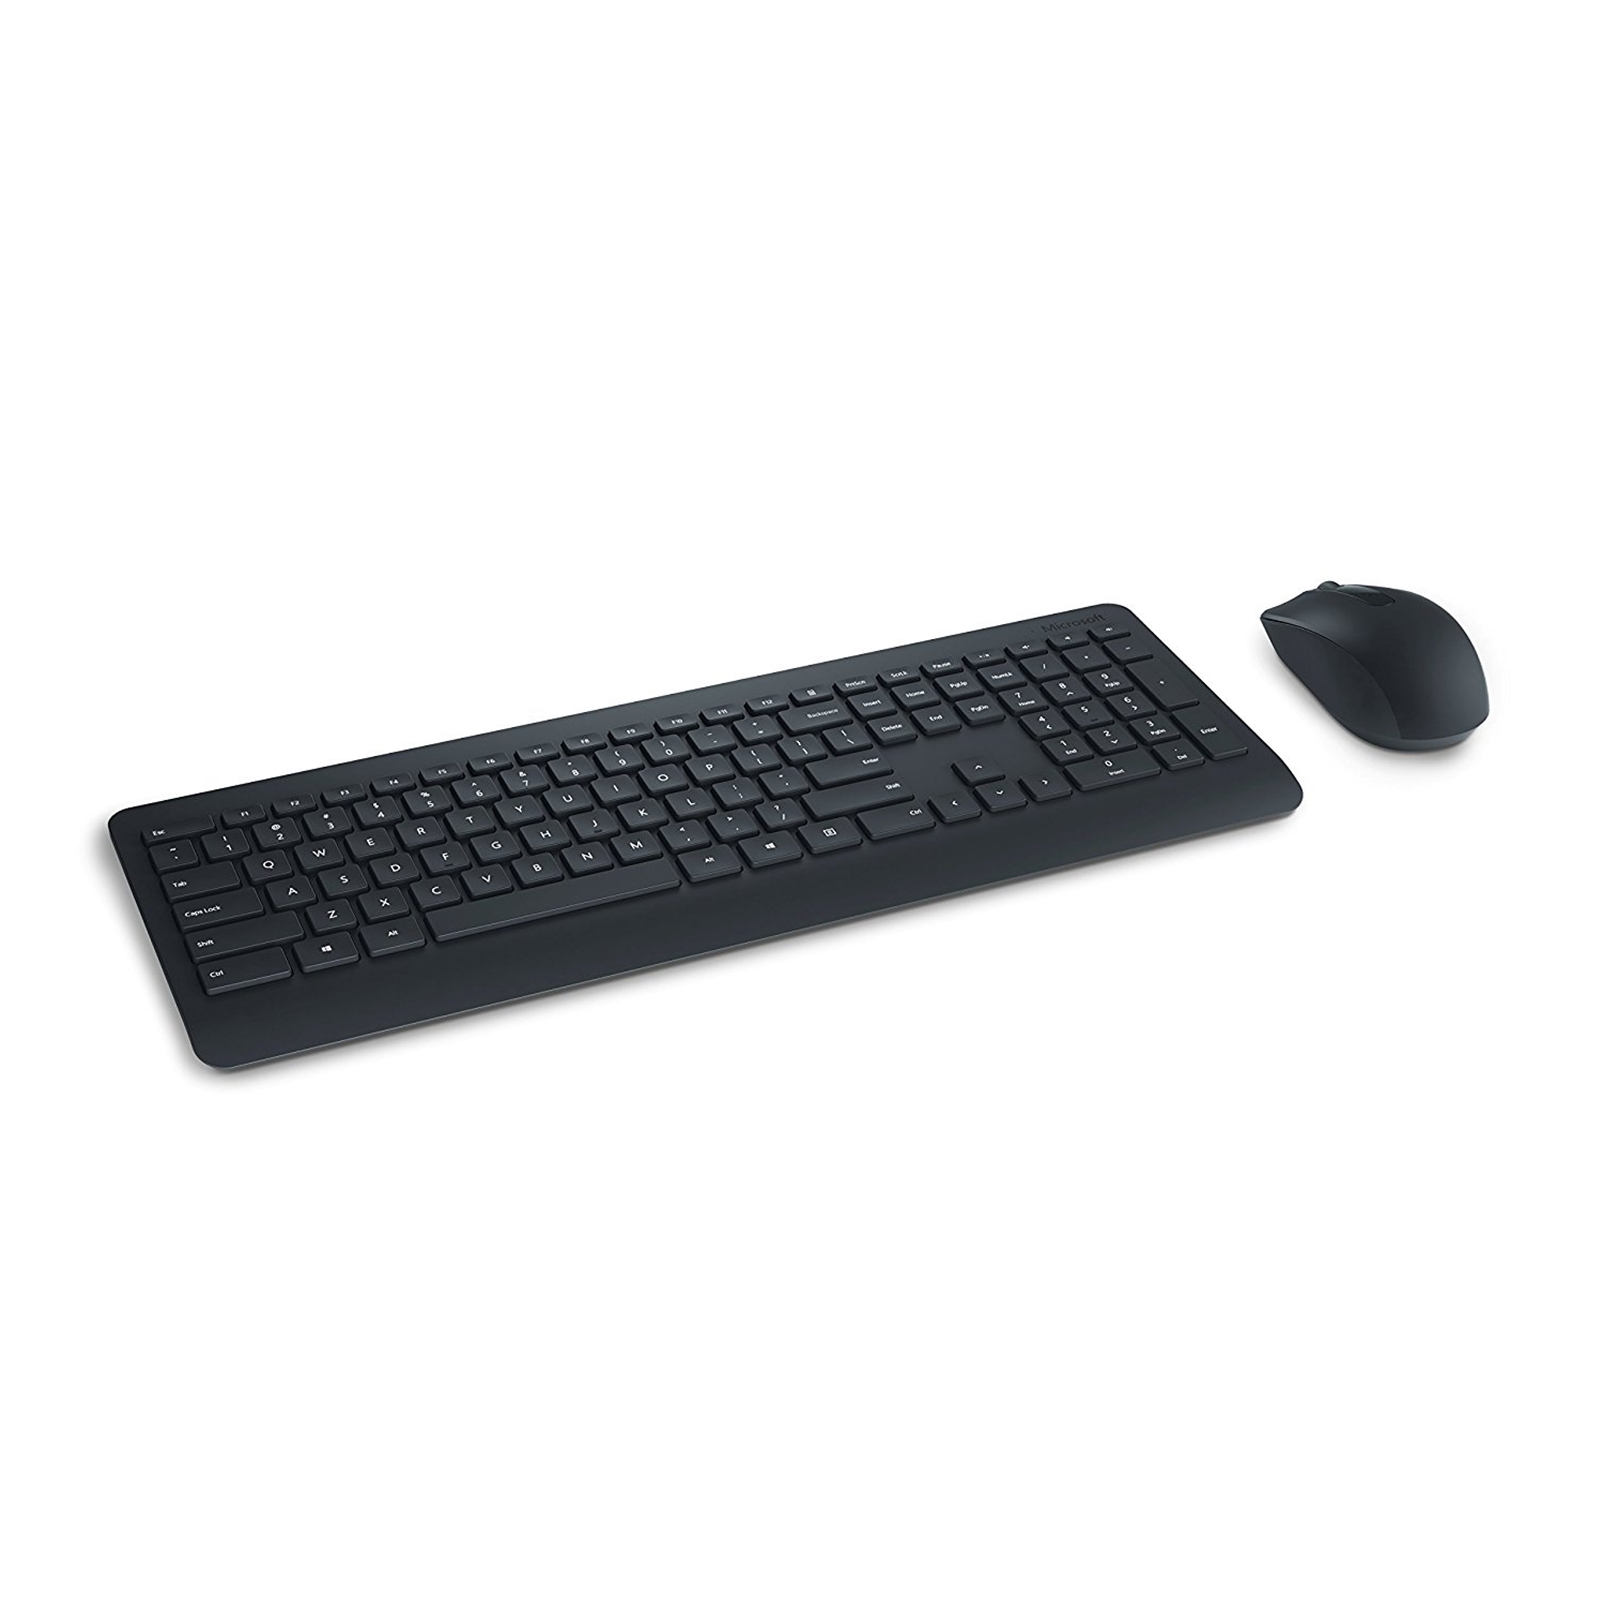 Microsoft Desktop 900 Wireless Keyboard and Mouse, 2.4 GHz, Ambidextrous Optical Mouse, Full-Size Keyboard, Compatible with Windows, Mac and Android, QWERTY UK English Layout, Black